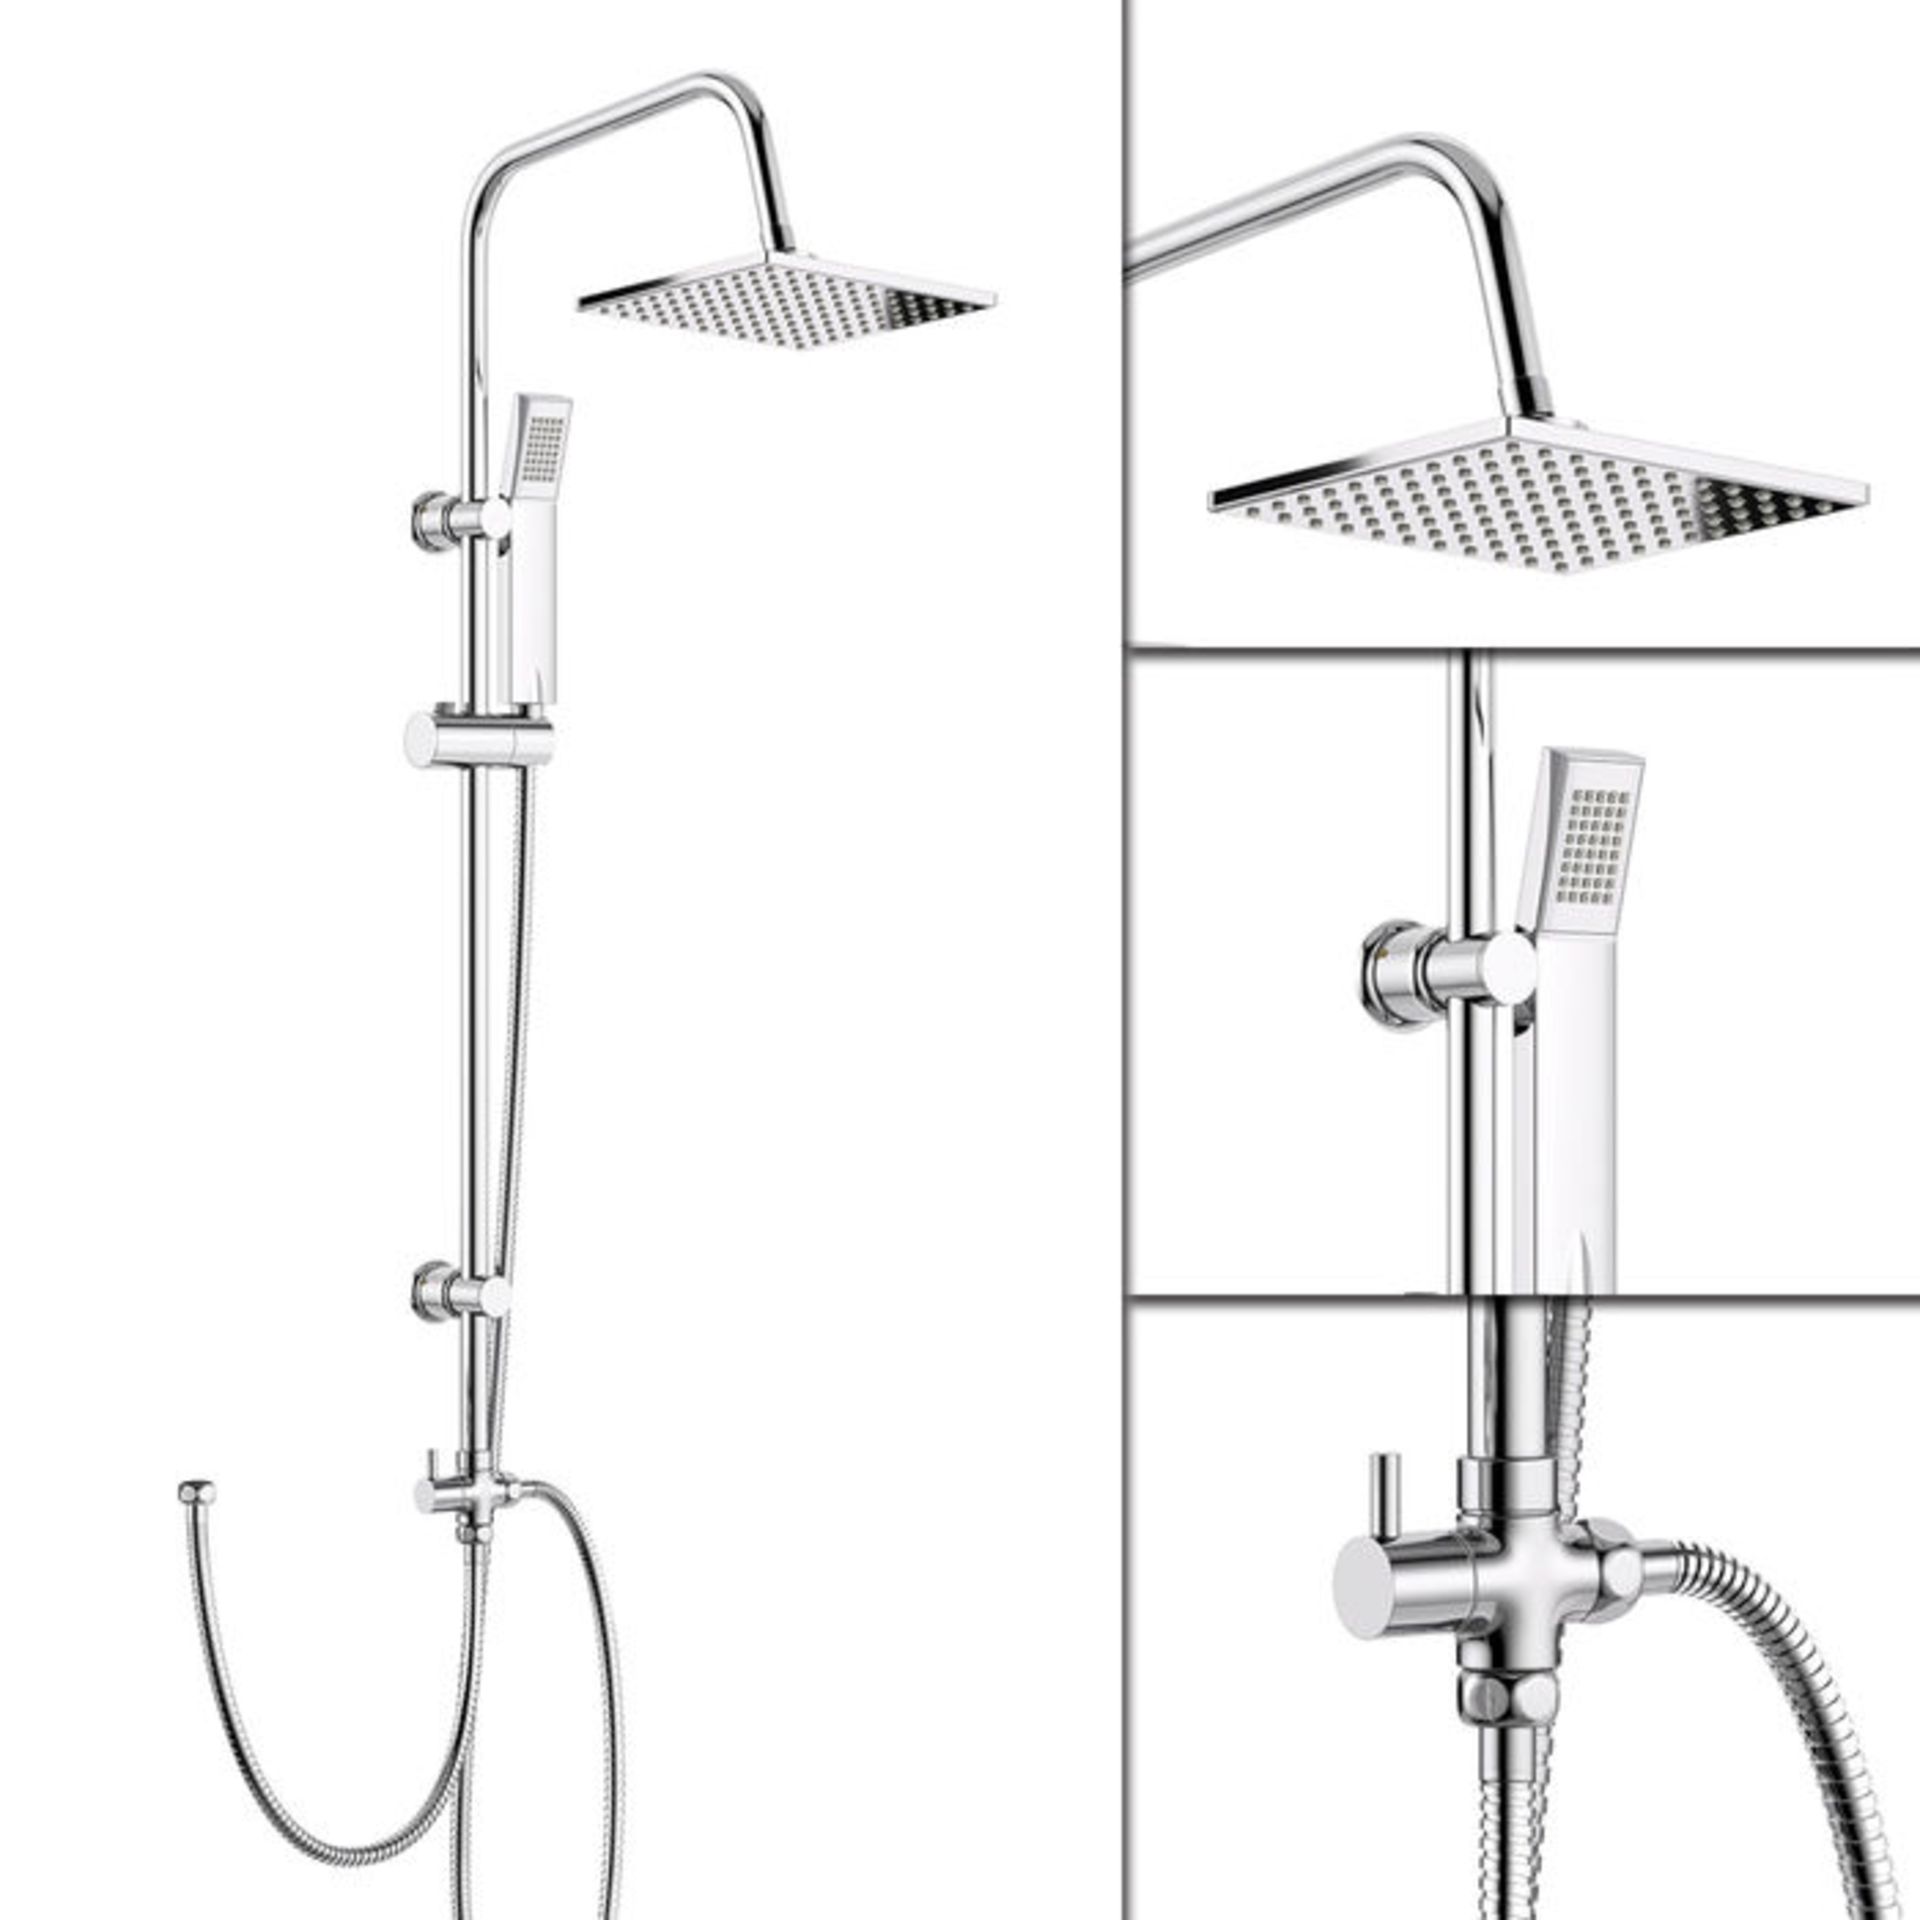 (DW237) 200mm Square Head, Riser Rail & Handheld Kit Quality stainless steel shower head with ... - Image 3 of 3